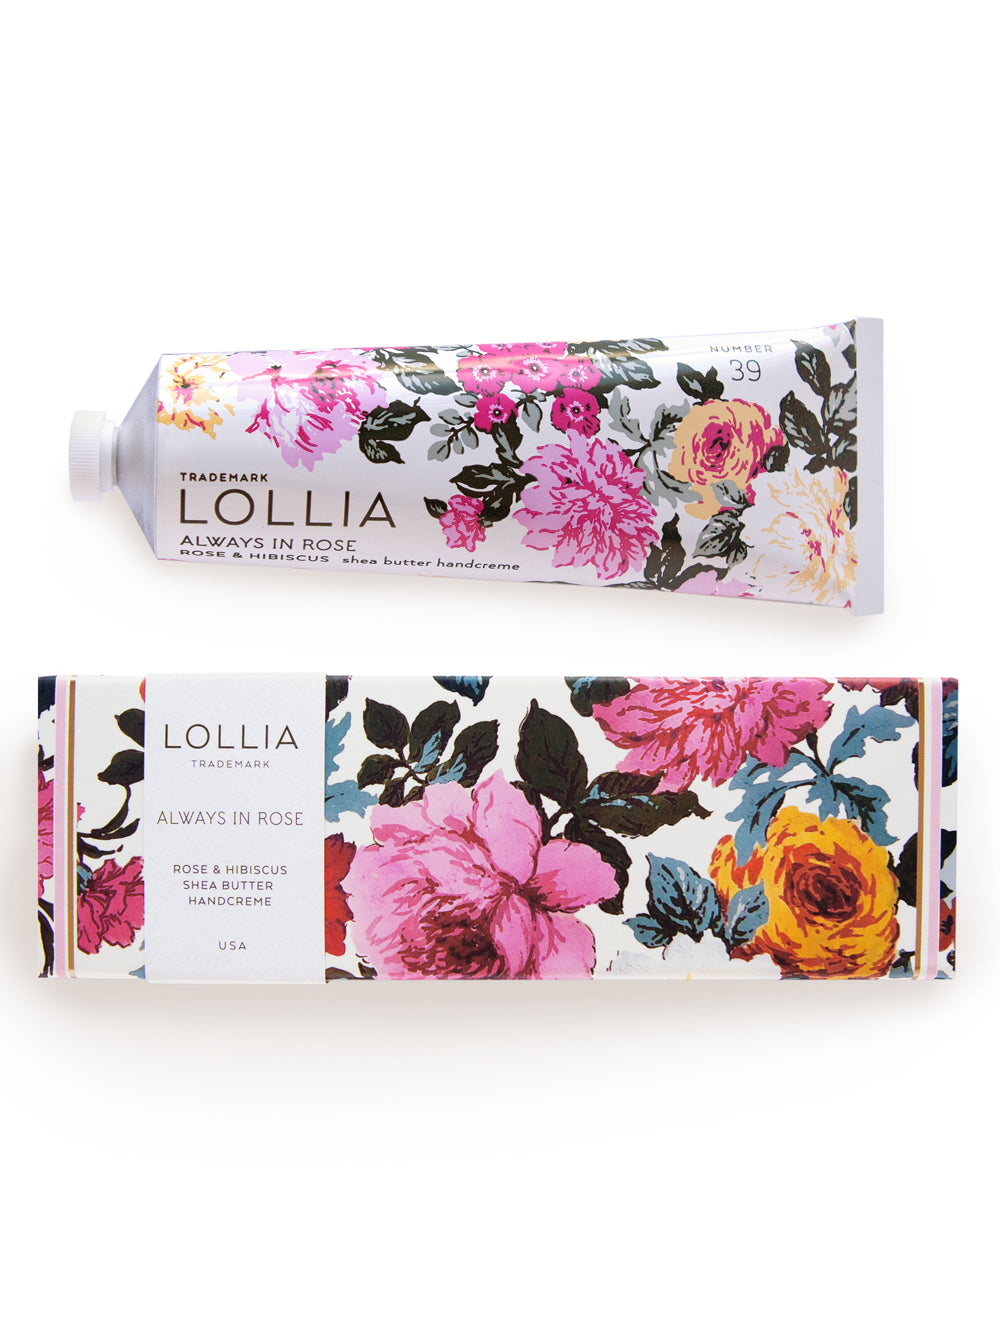 A tube of Margot Elena's Lollia Always in Rose Shea Butter Hand Cream with floral packaging, featuring pink and yellow roses on a white background. The design includes the text "Always in Rose" and "Rose Extract & Hibiscus".